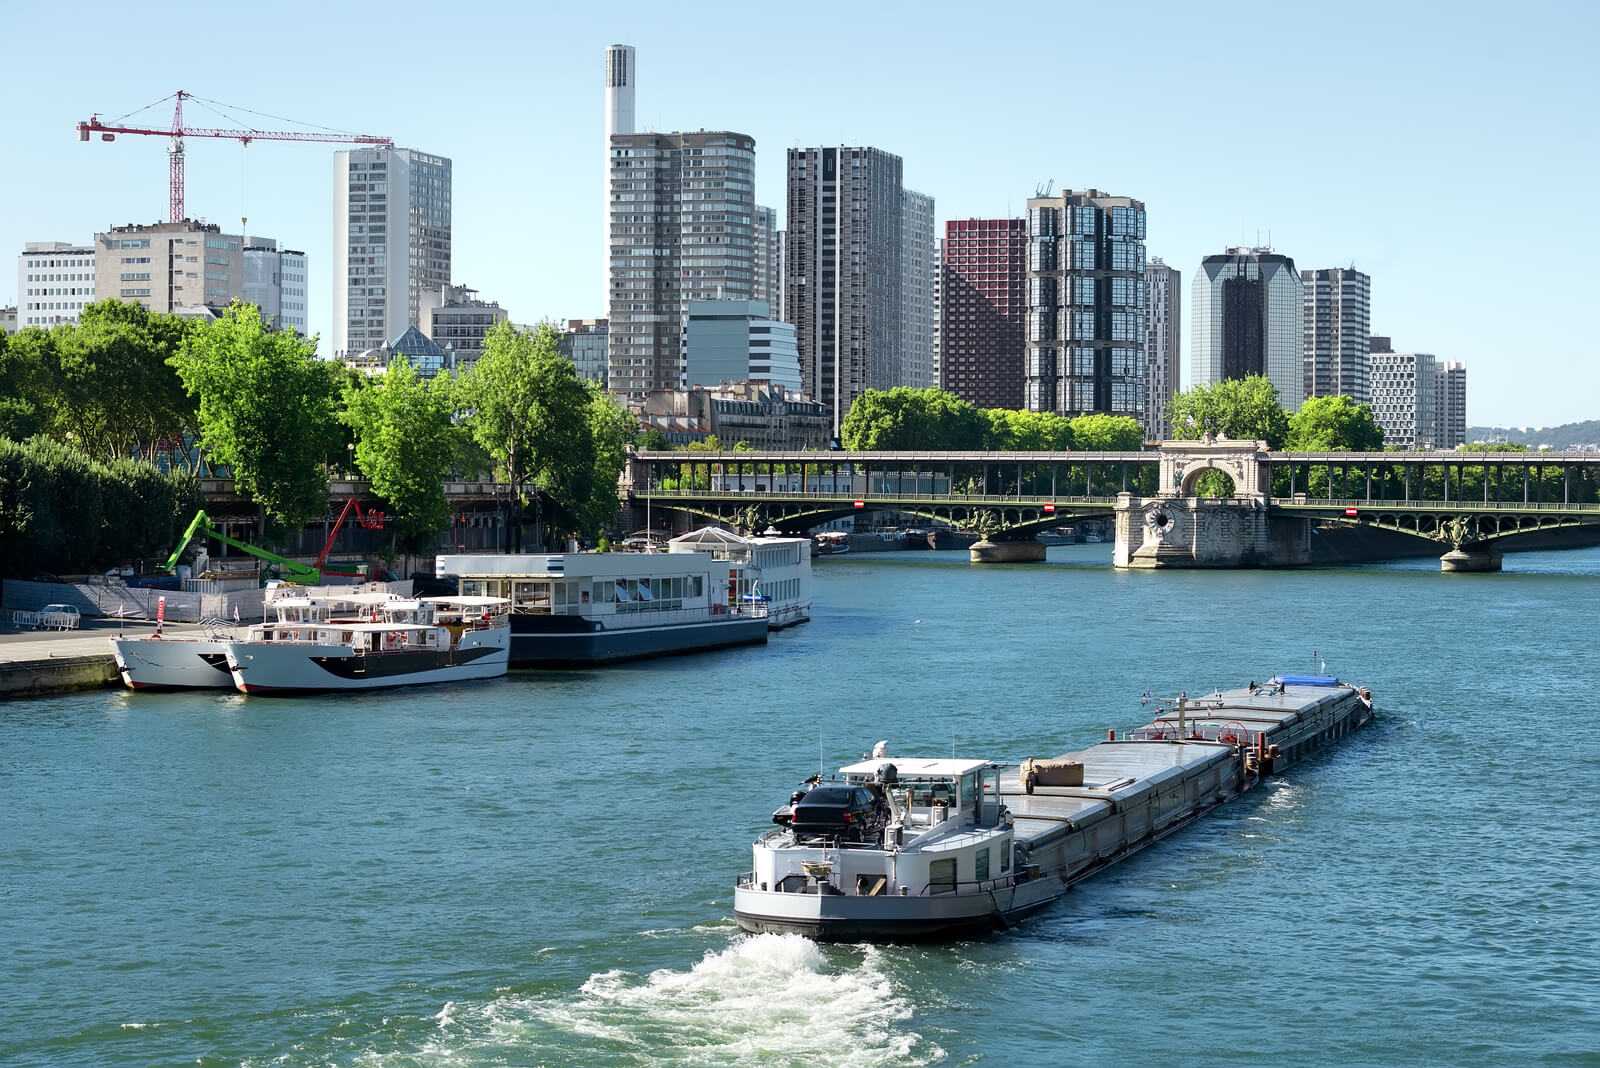 Do you need reservations for Seine River cruise